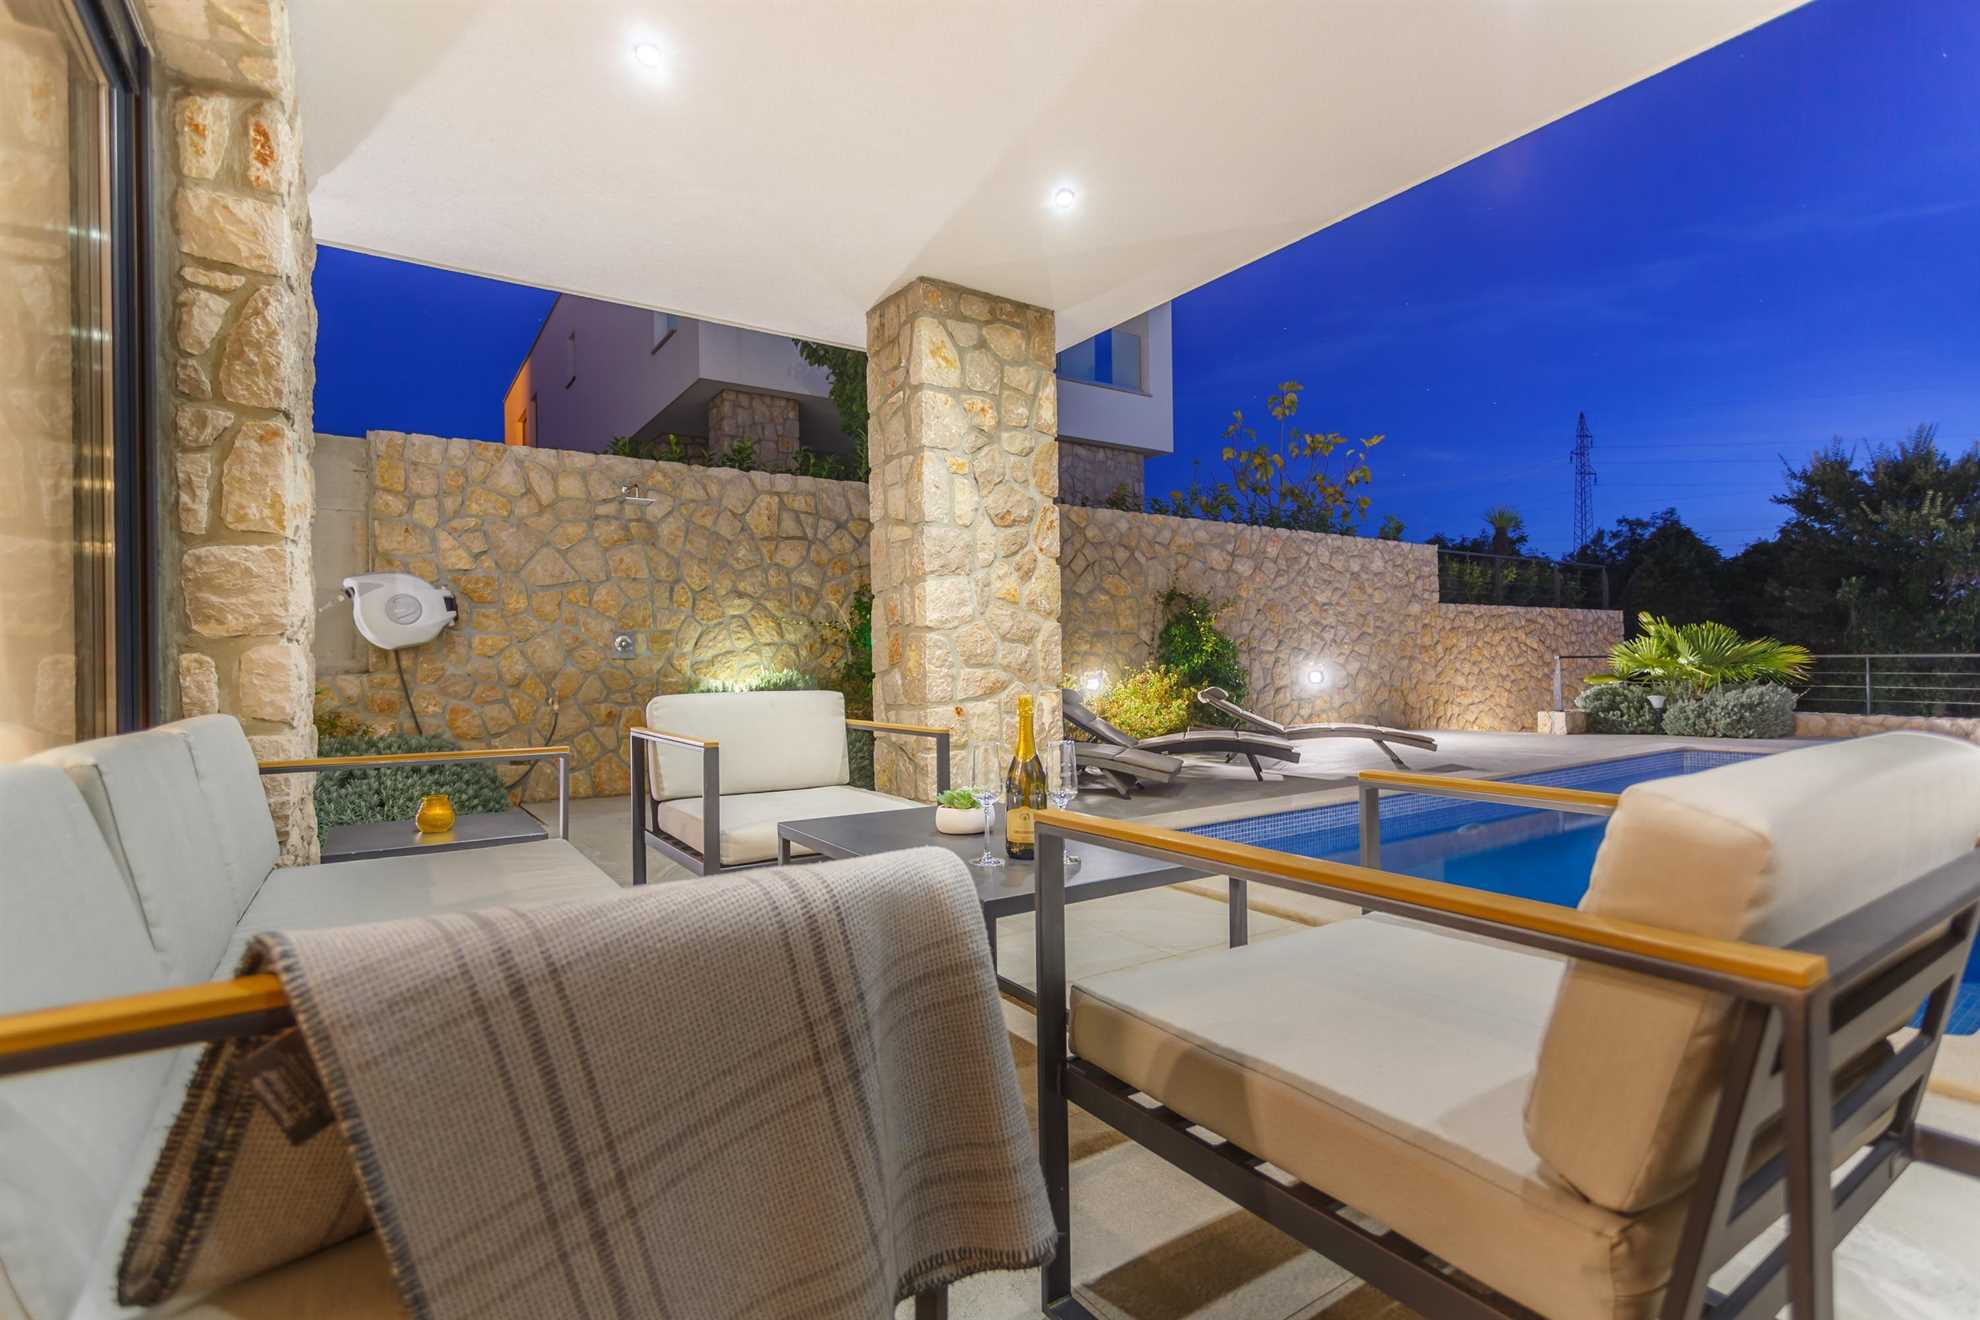 Modern exterior with a small table and modern armchairs next to a pool with sun loungers.